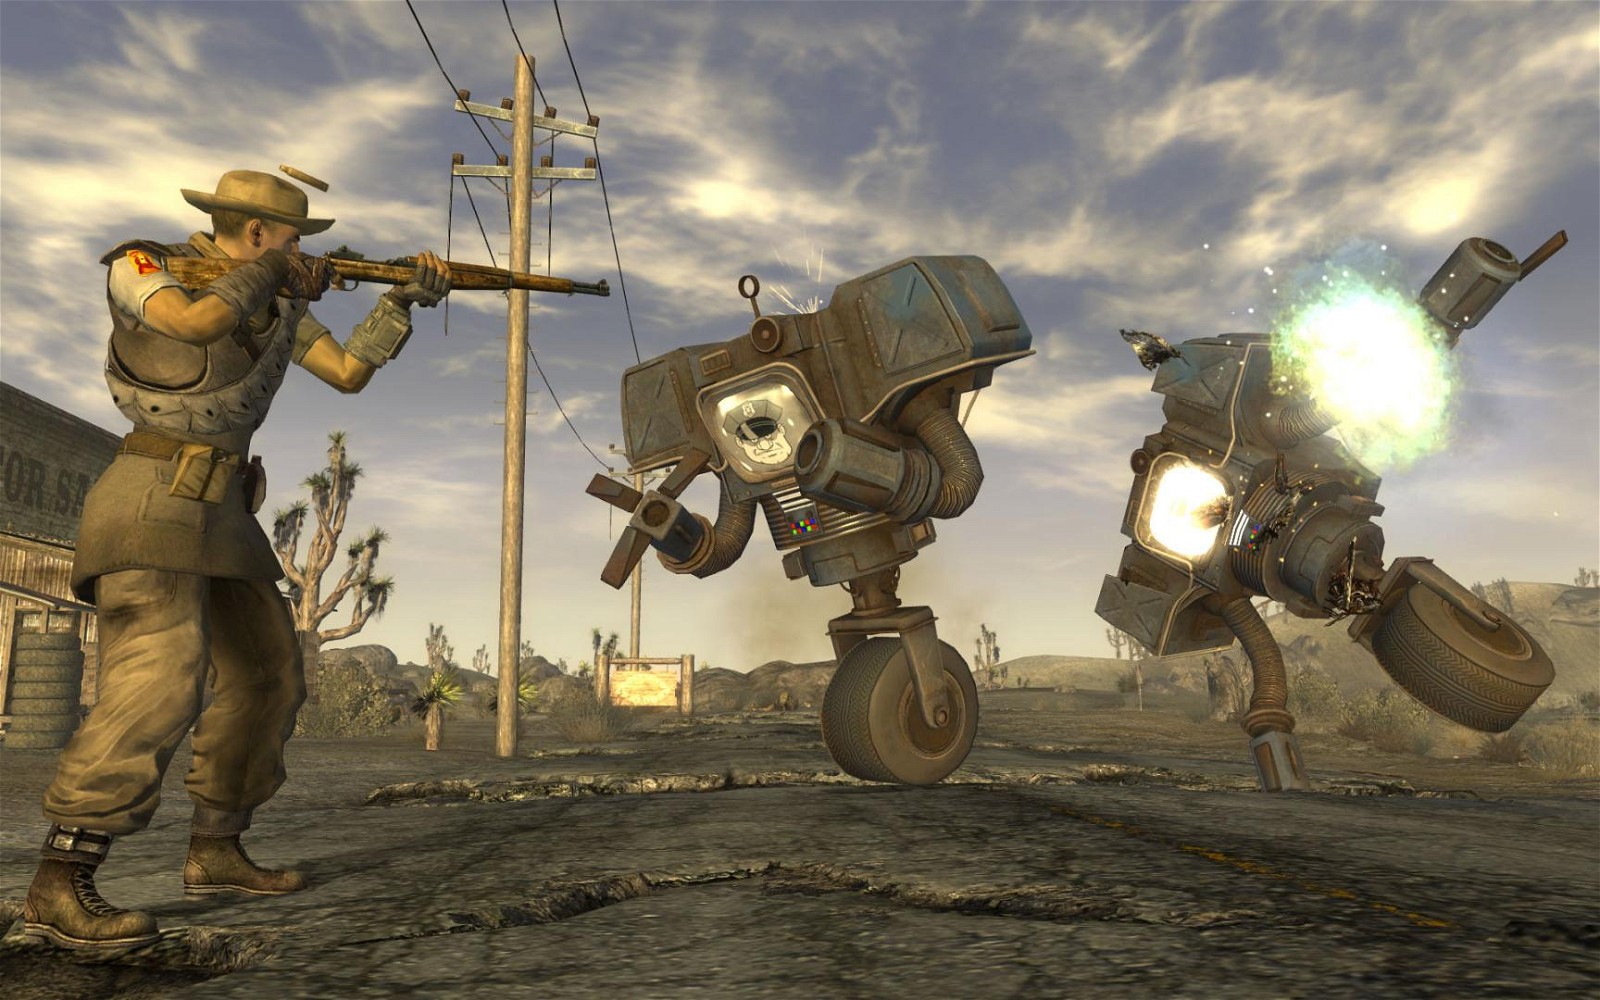 Todd Howard acknowledged the quality of Obsidian's work on New Vegas by introducing new mechanics, narrative elements, and a different tone.